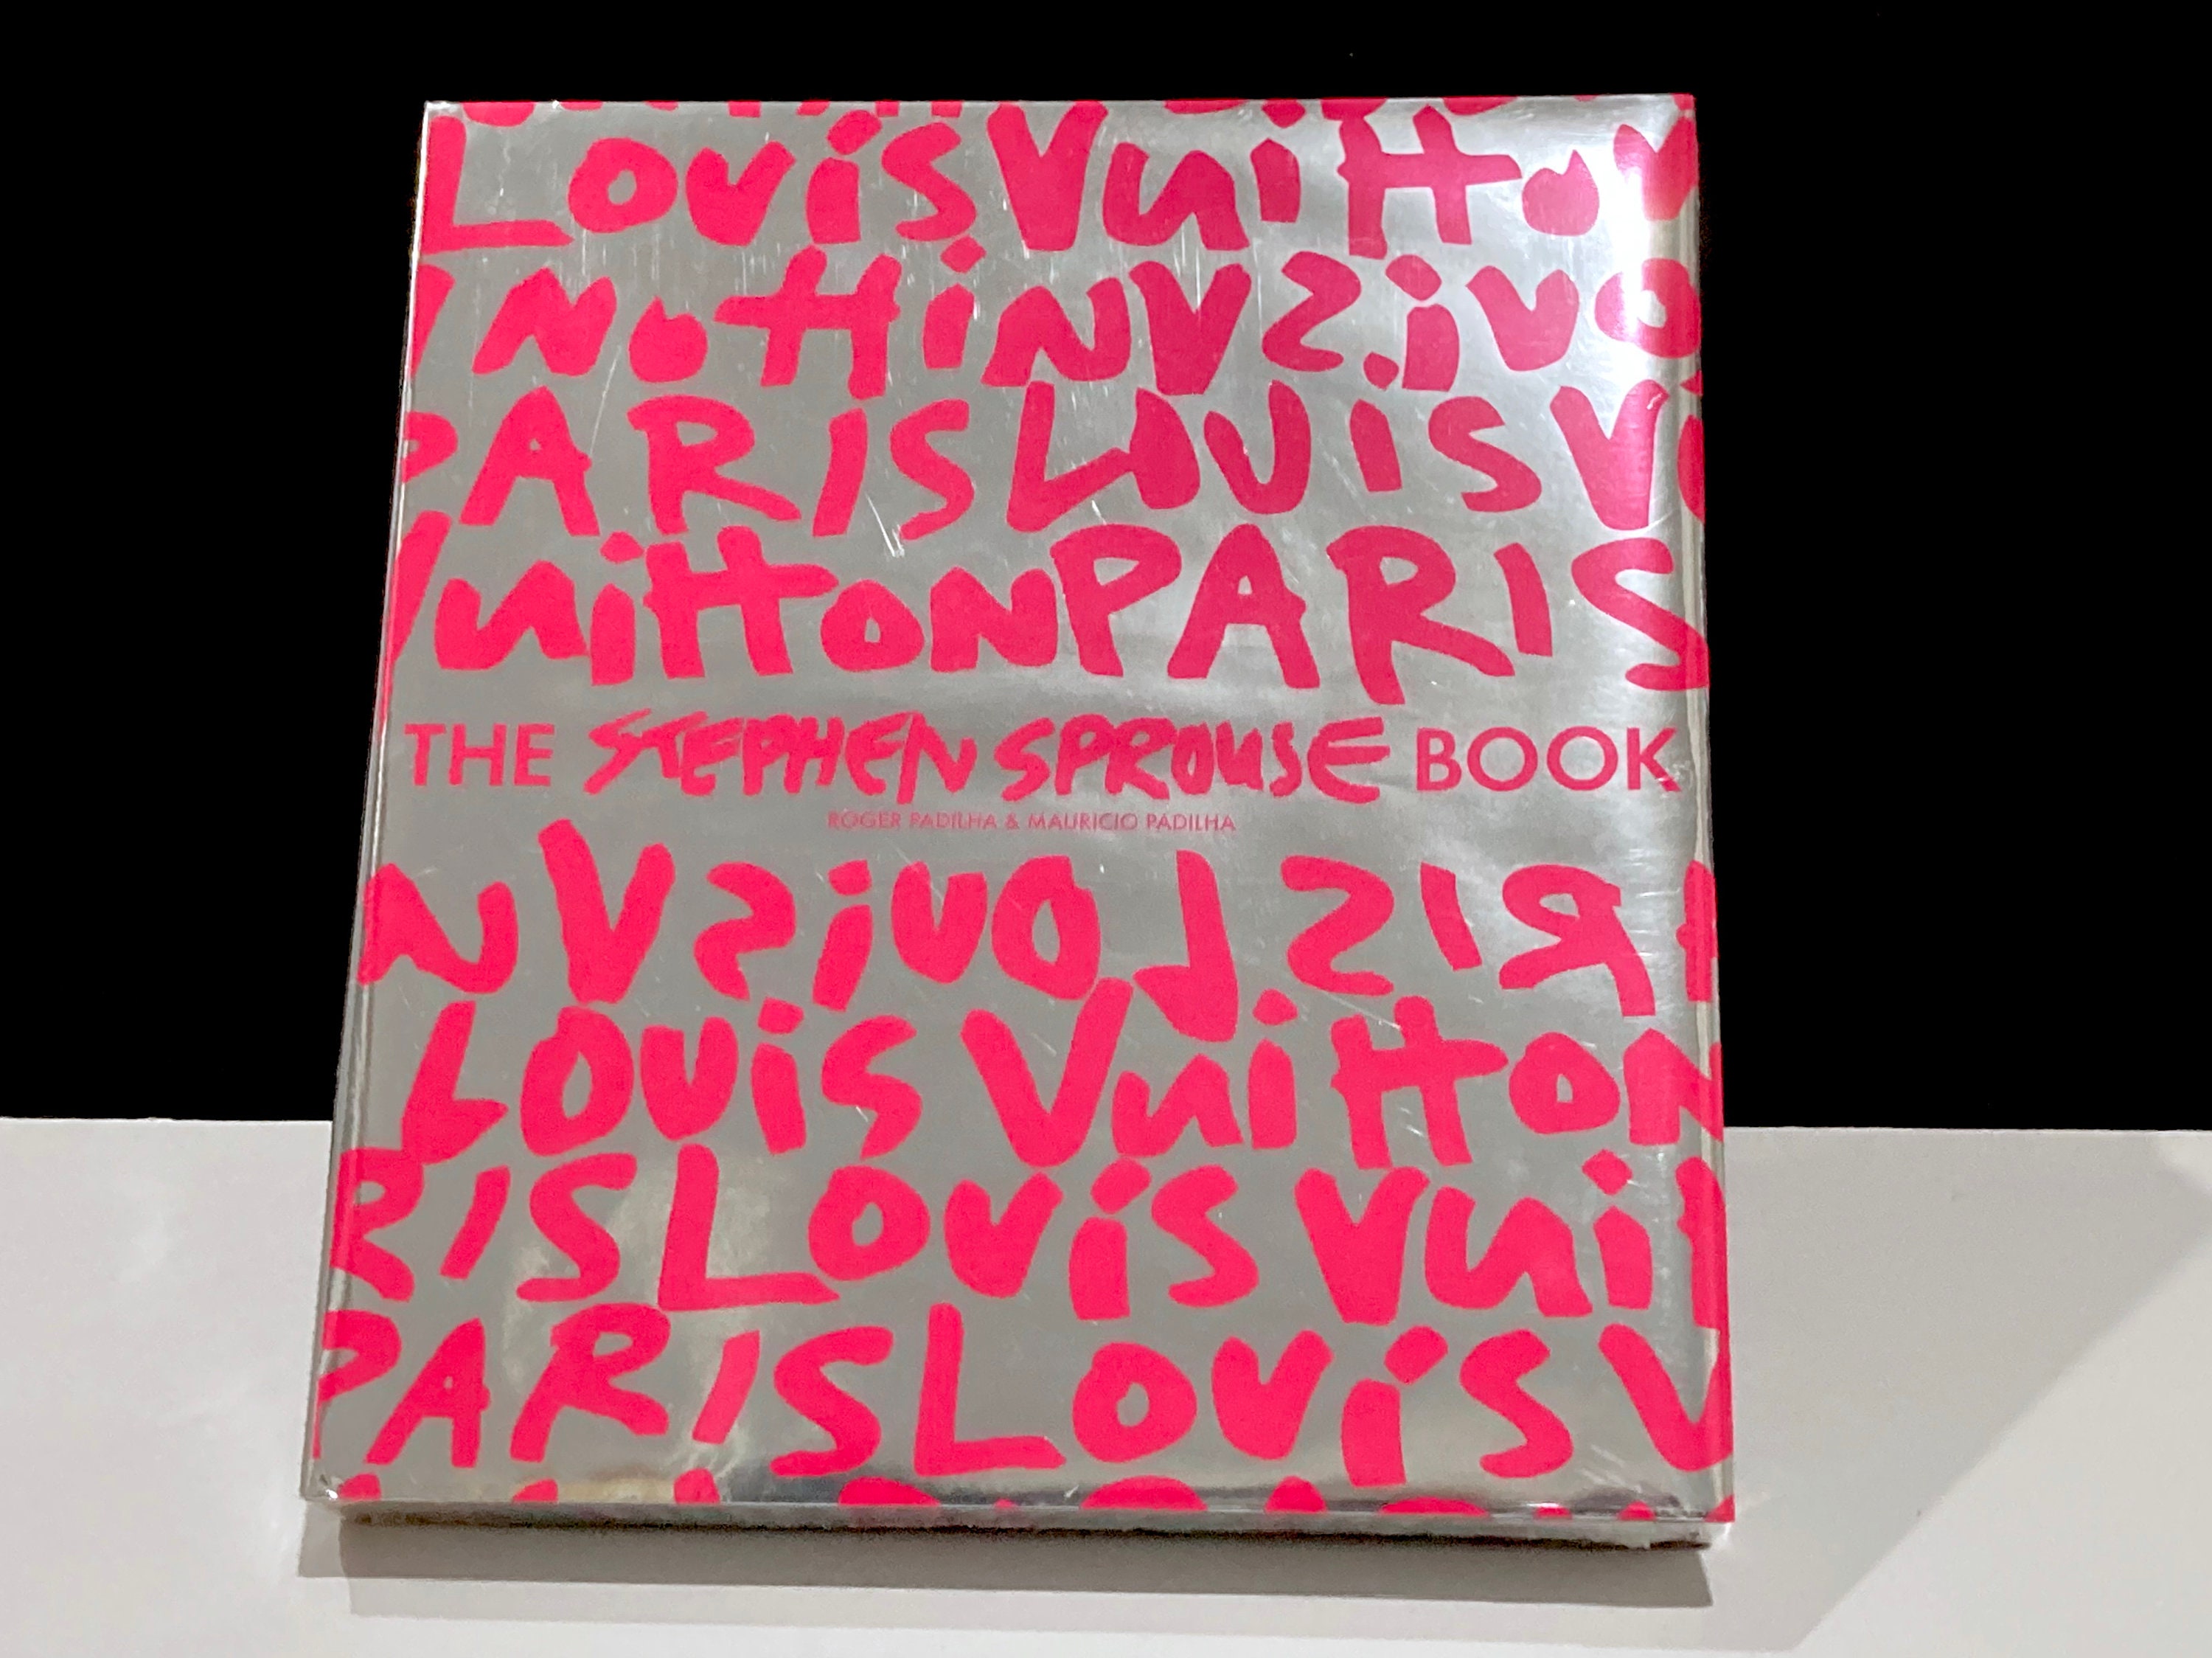 The Stephen Sprouse Book - Kate Moss in Sprouse!